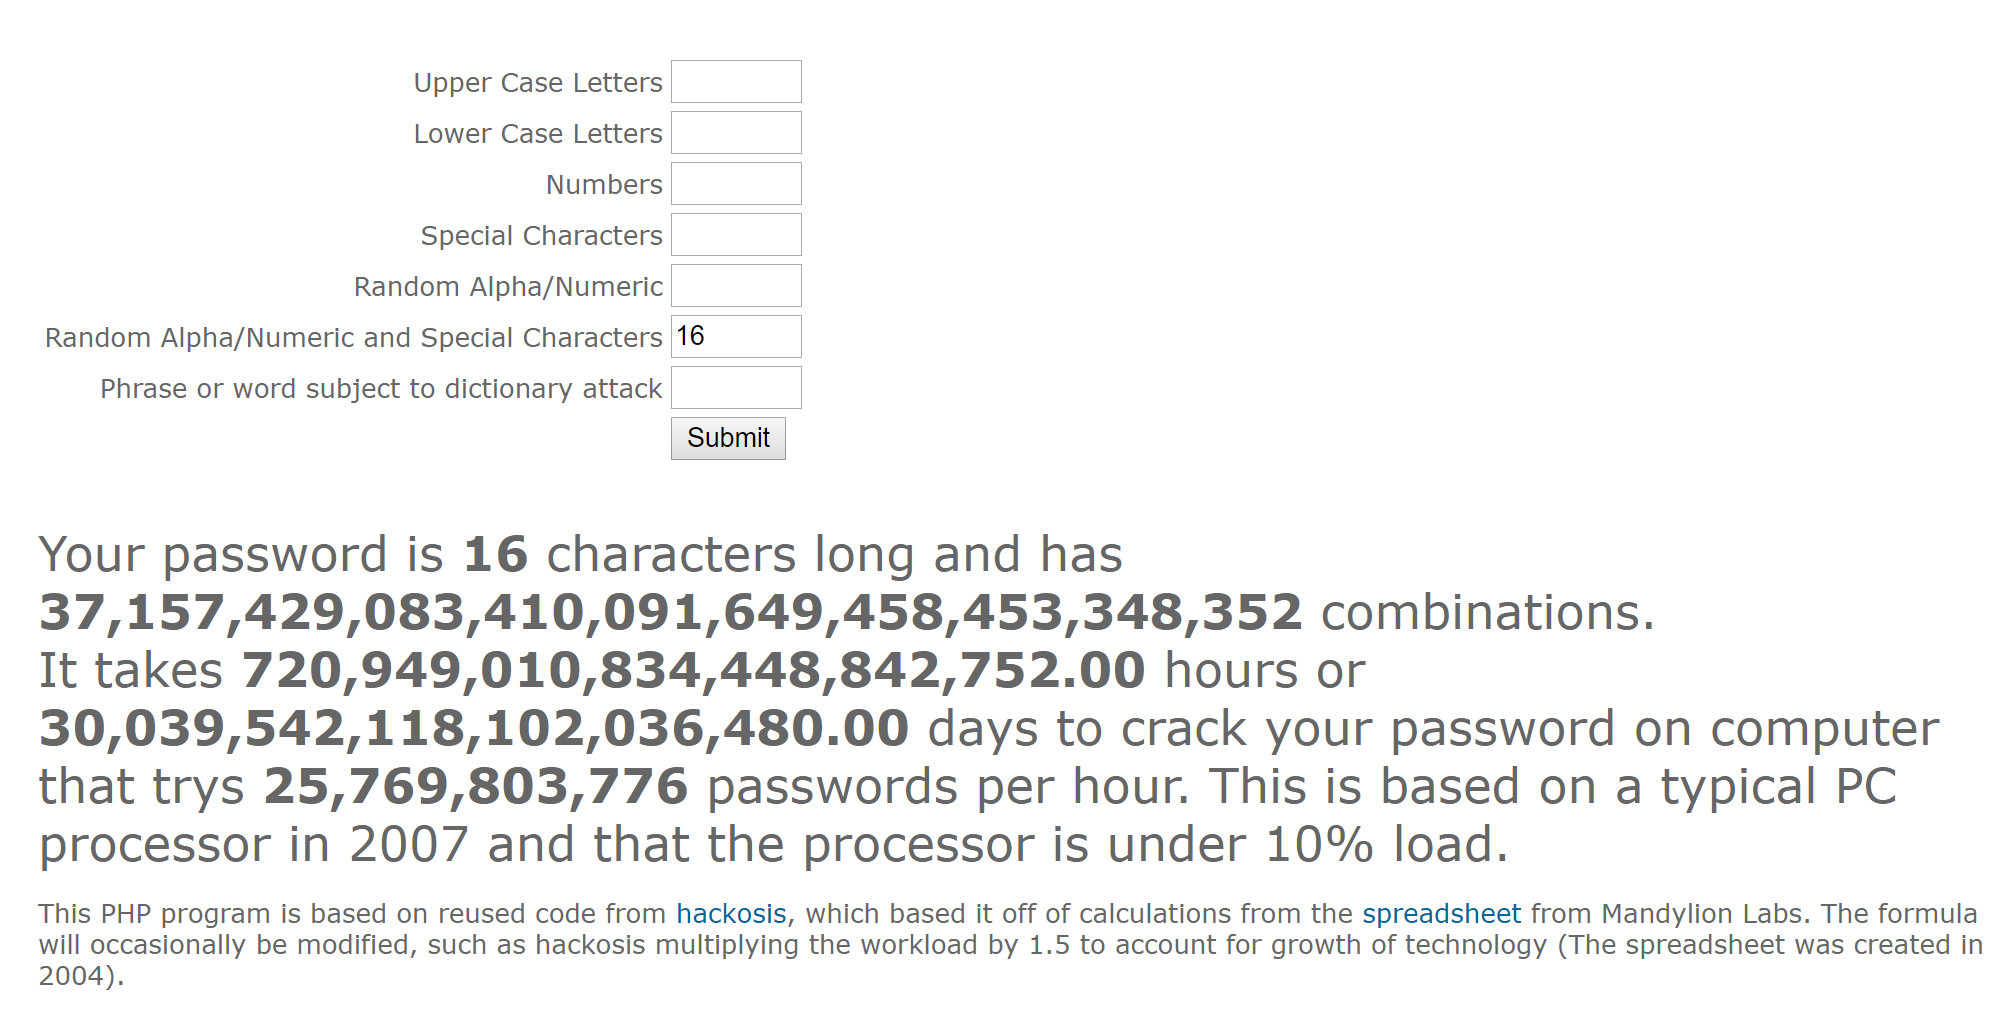 16 character password takes 30 trillion years